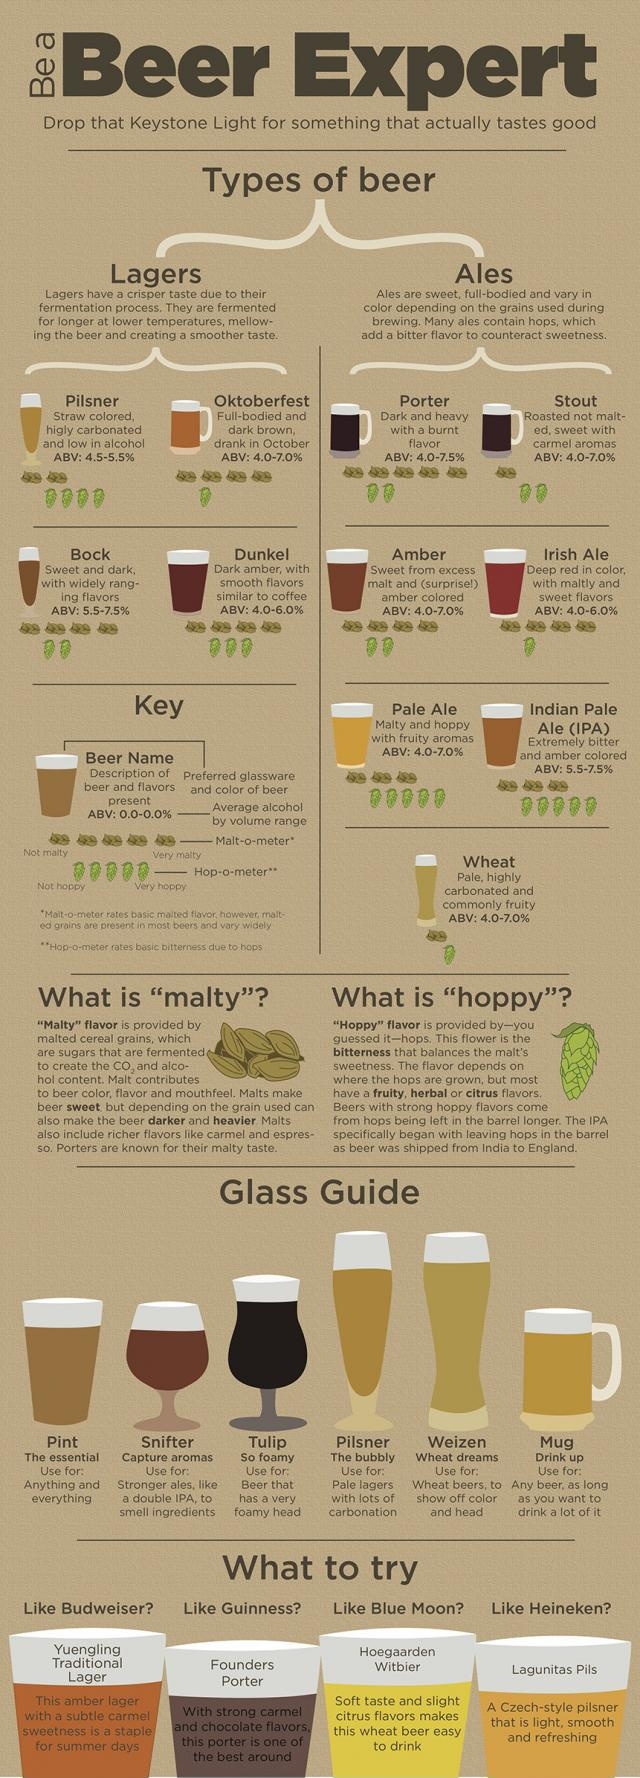 Be a Beer Expert